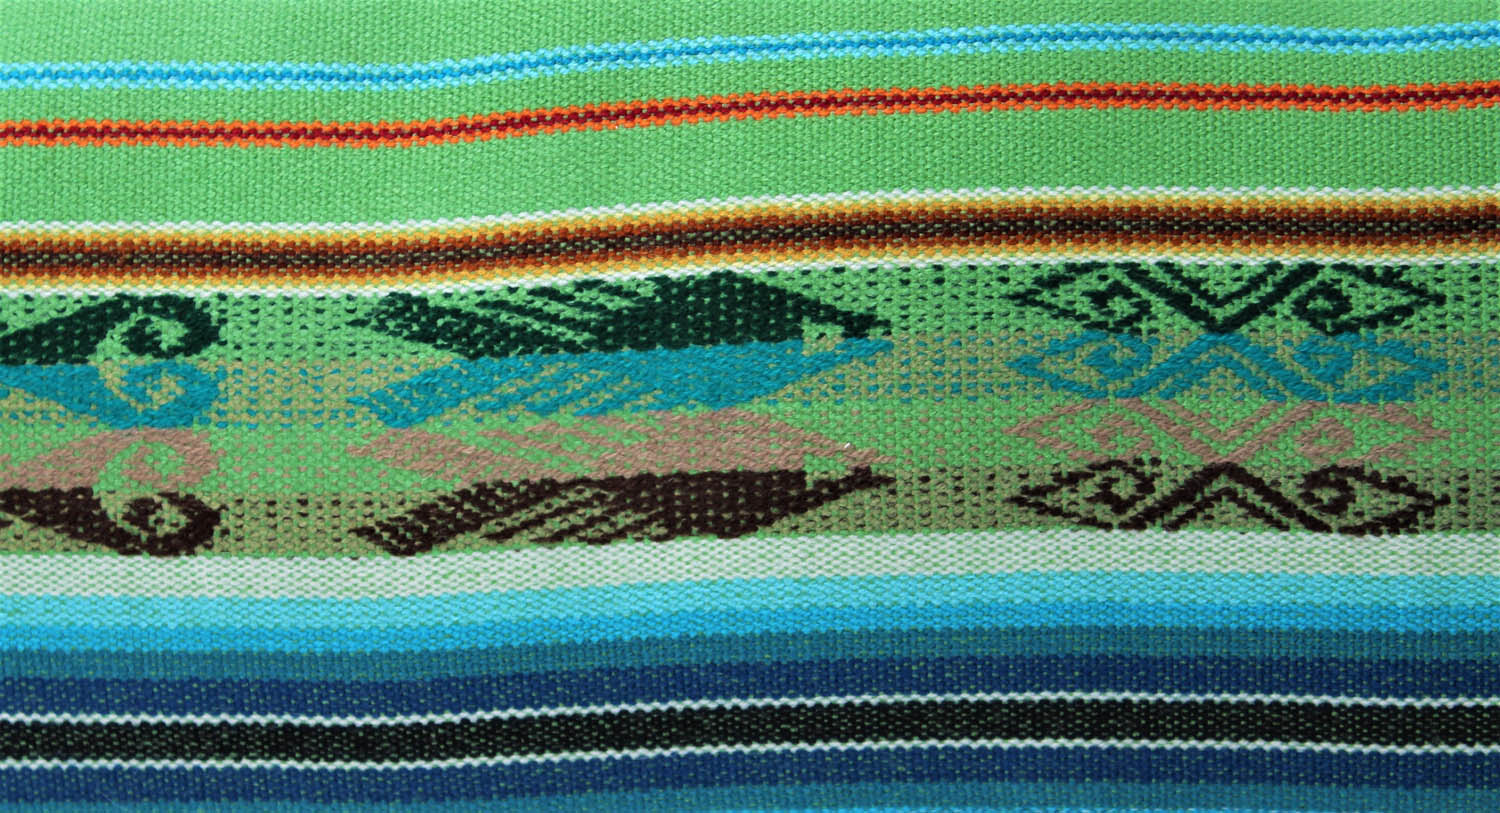 El Mar Pillow Collection: Green and Teal Multi-Color Stripes with Fish and Orange Tassels